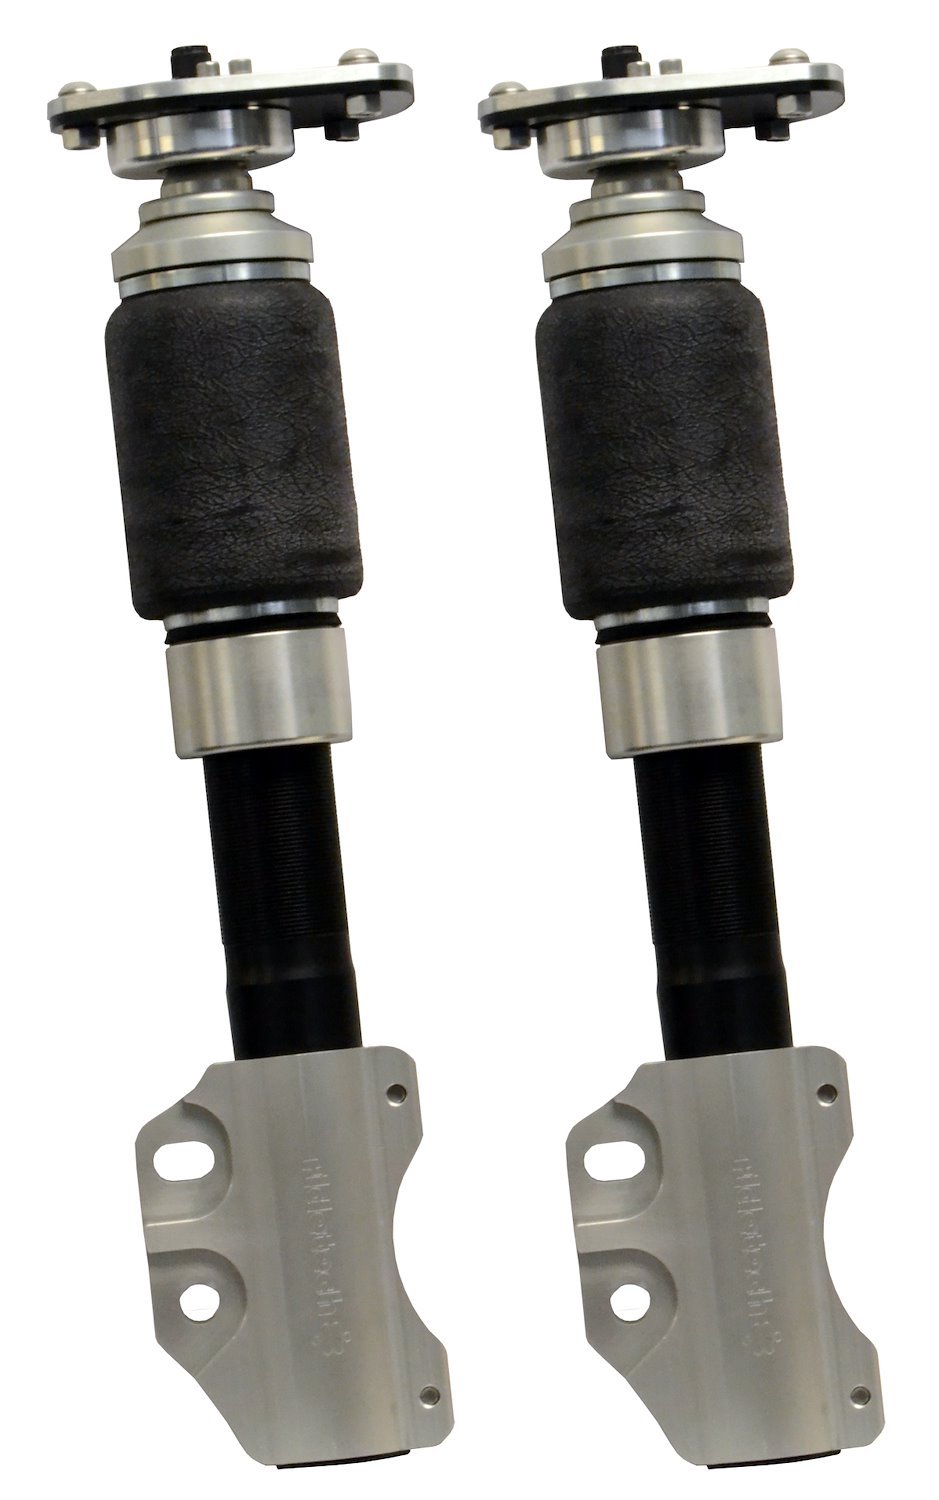 HQ Series front Shockwaves for 90-93 Mustang with SN-95 Spindles. Sold as pair.